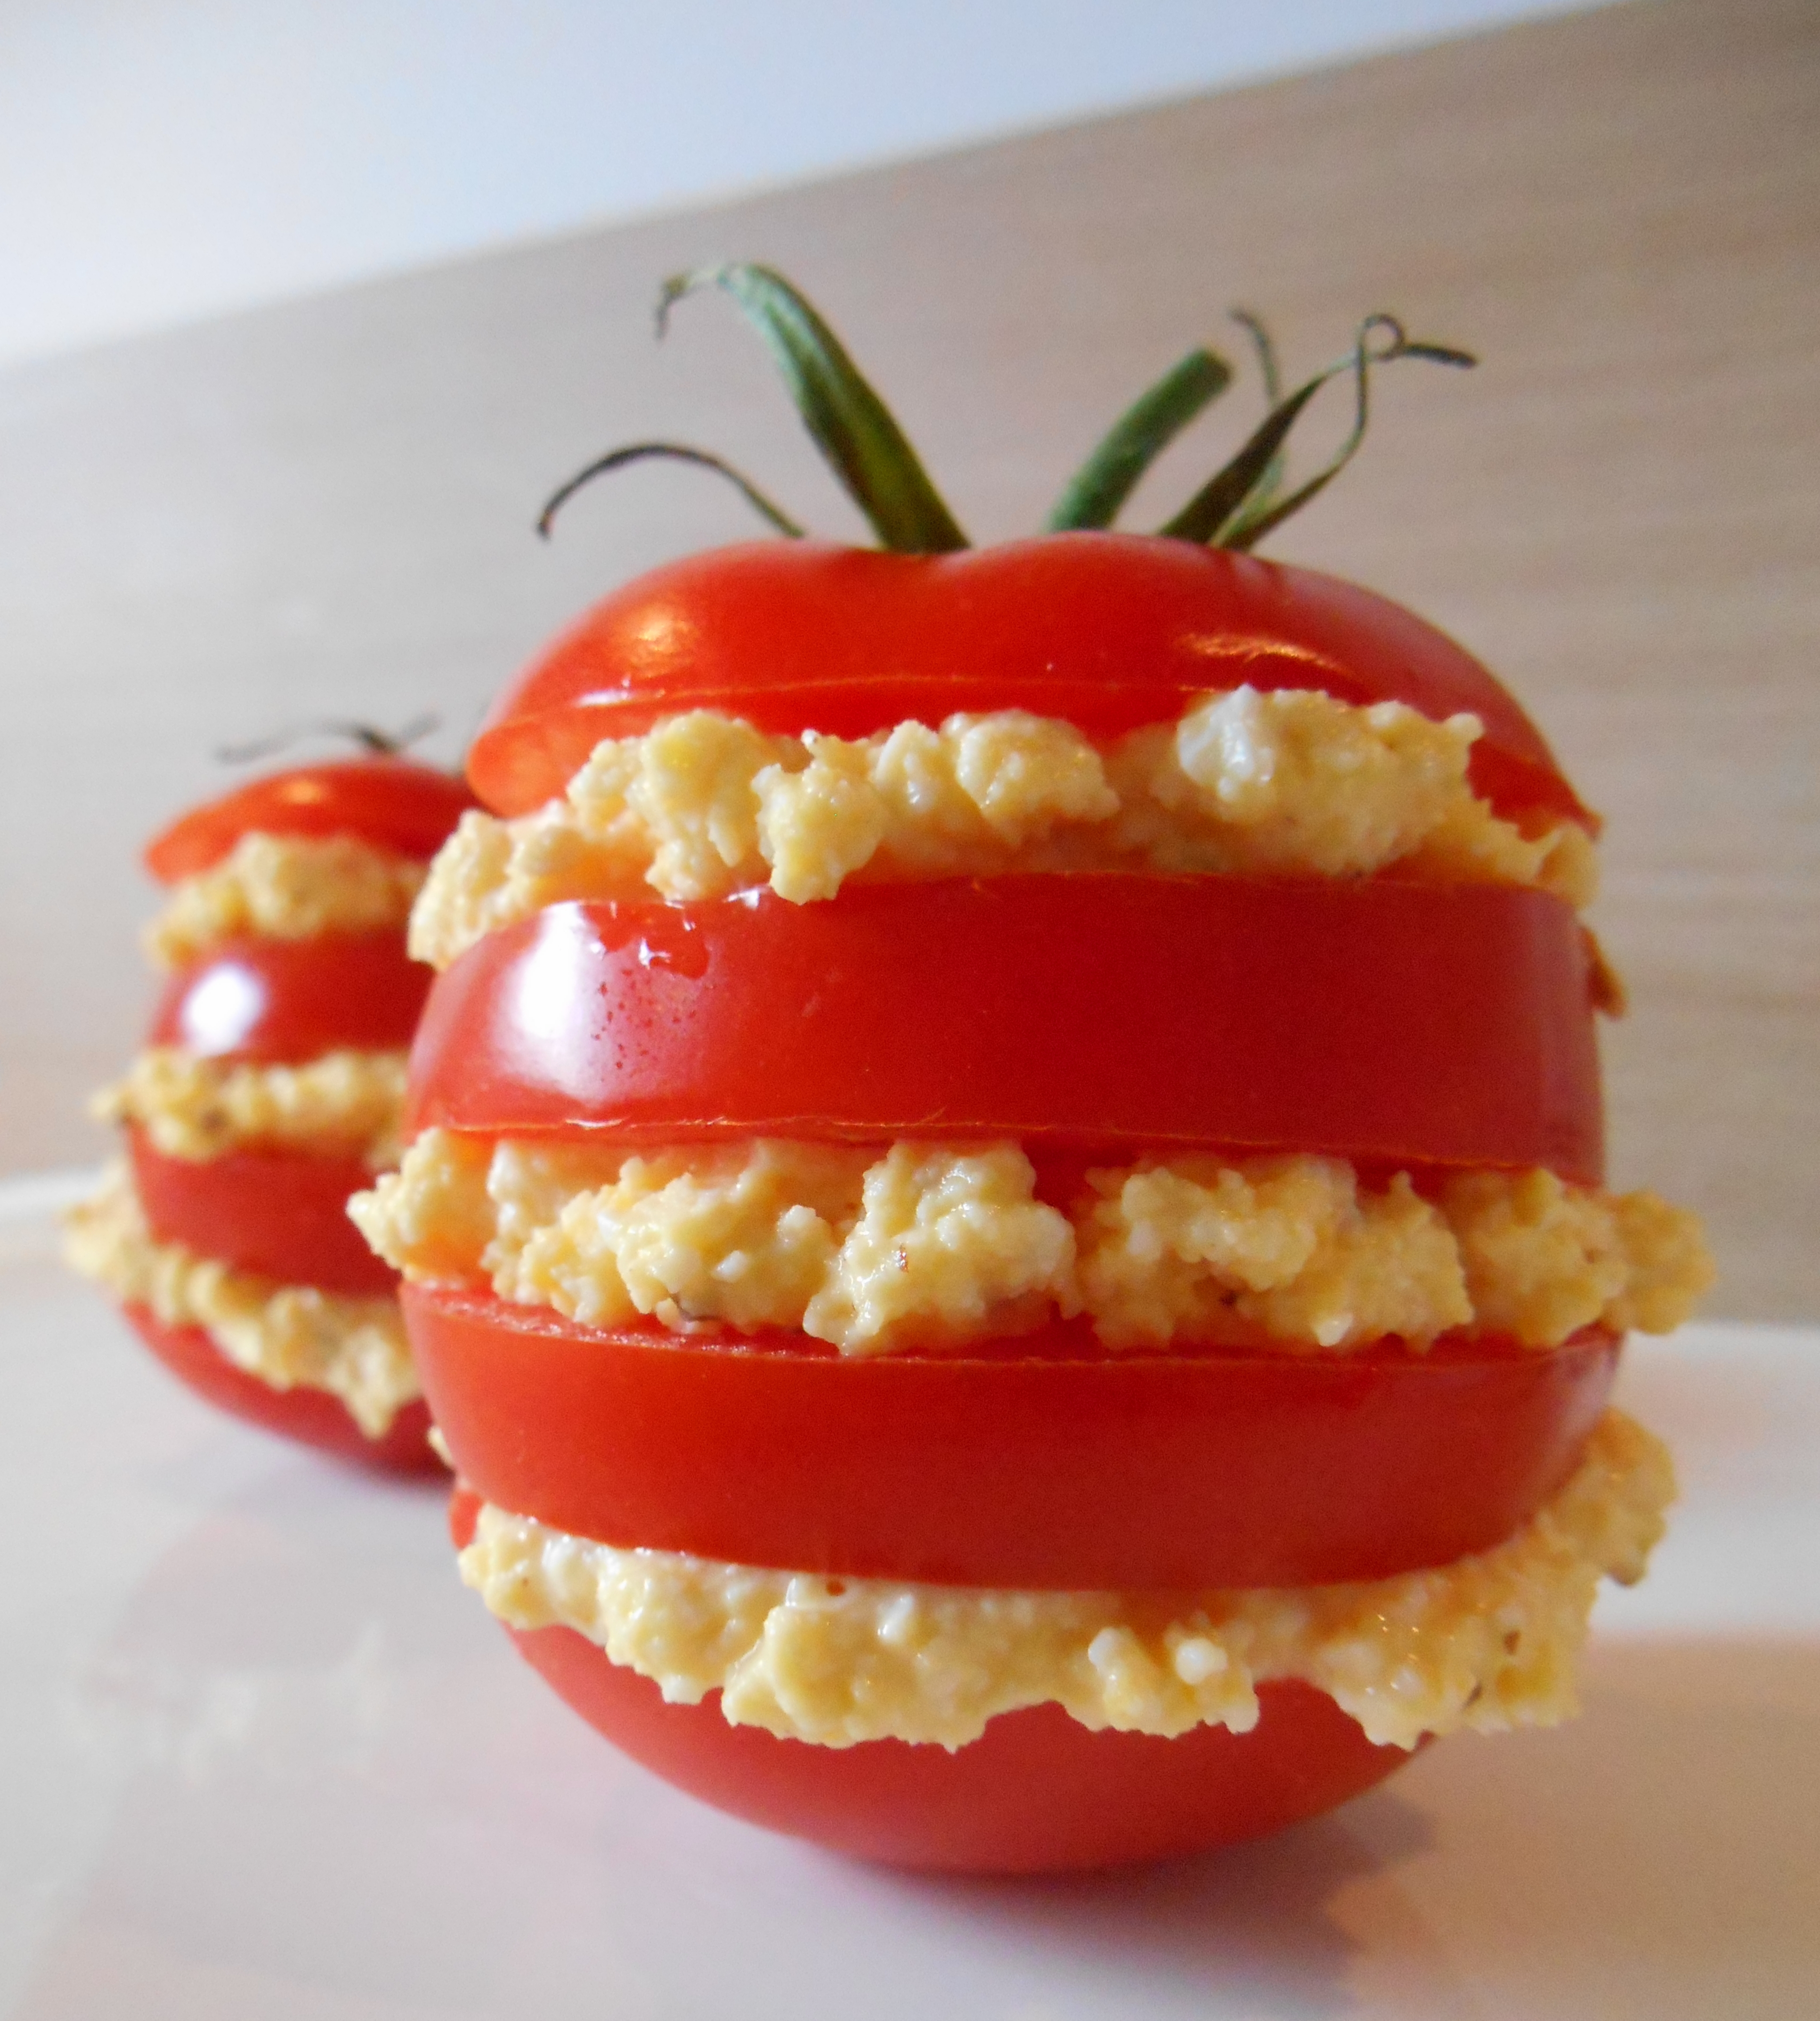 MILLE FEUILLE DE TOMATE MIMOSA